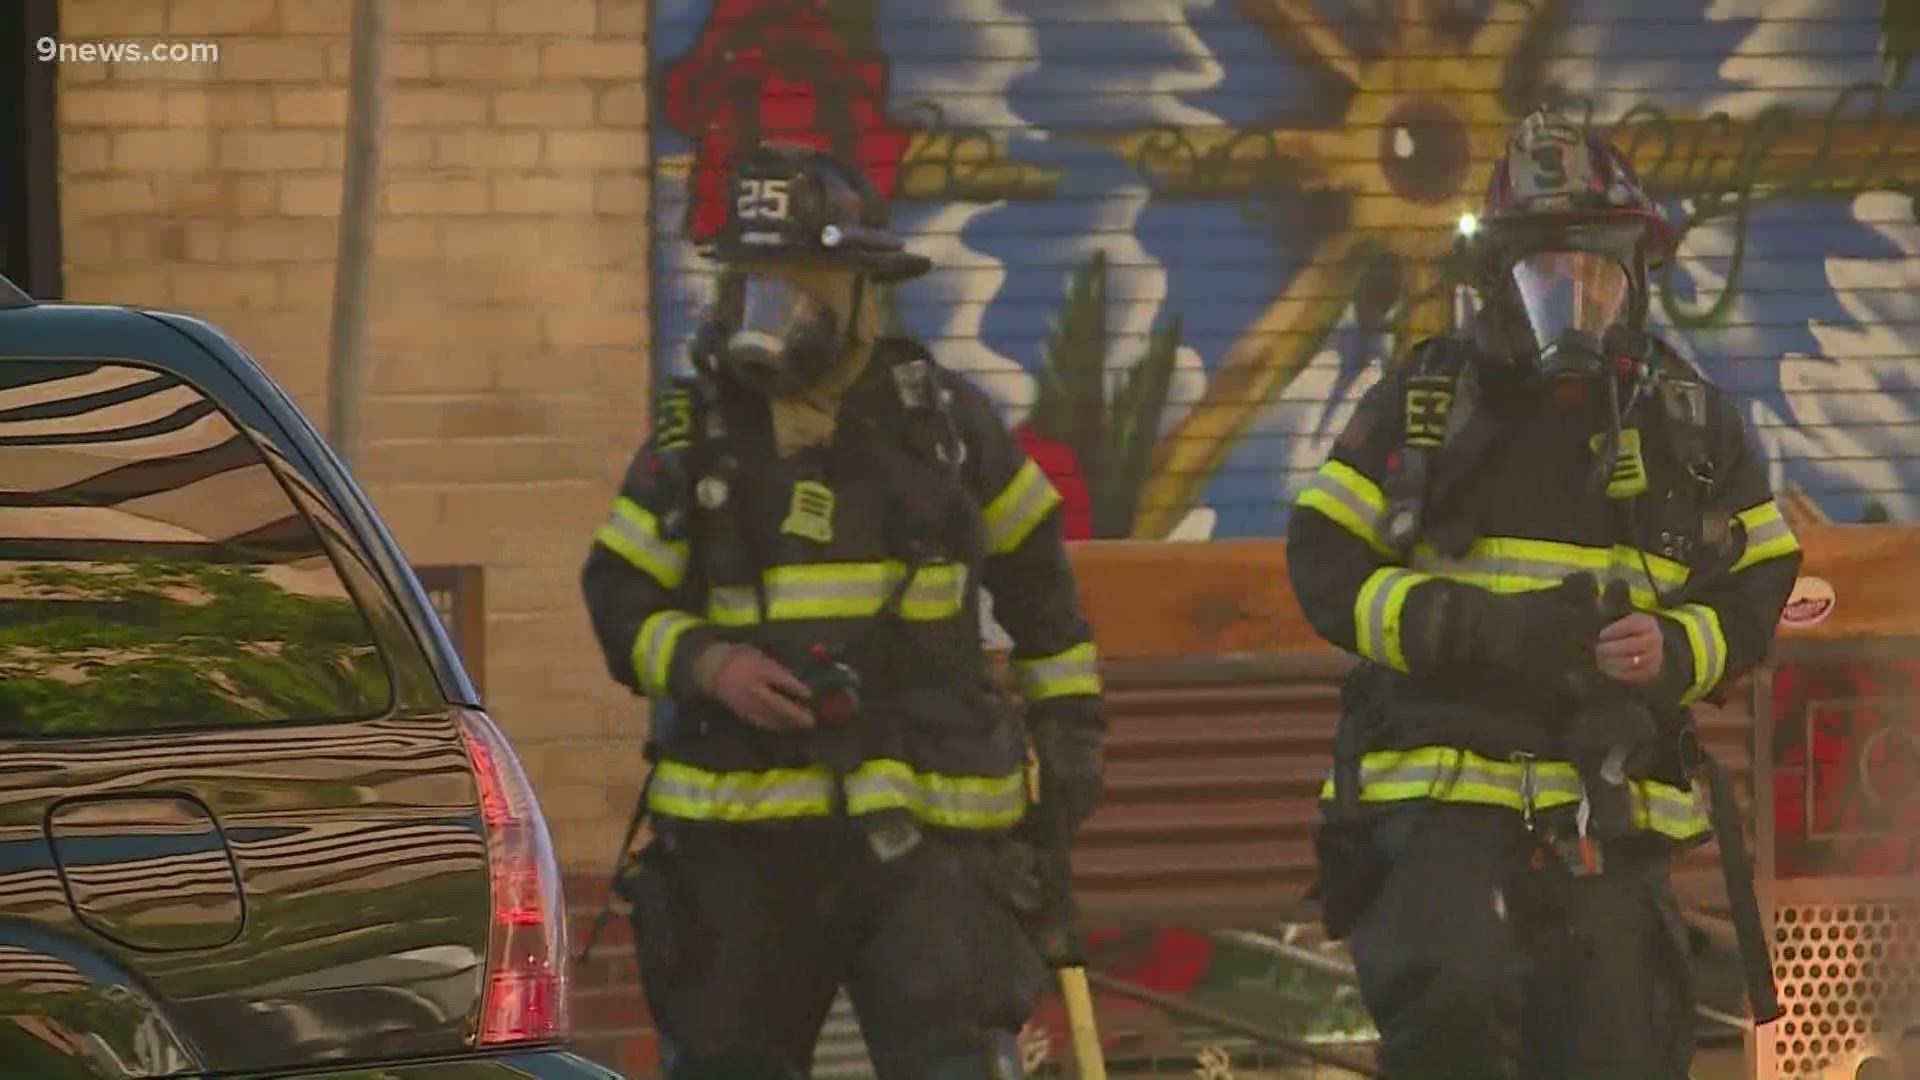 A fire was reported Wednesday morning at a business inside a strip mall near 17th Avenue and Logan Street in downtown Denver. More than 50 firefighters responded.